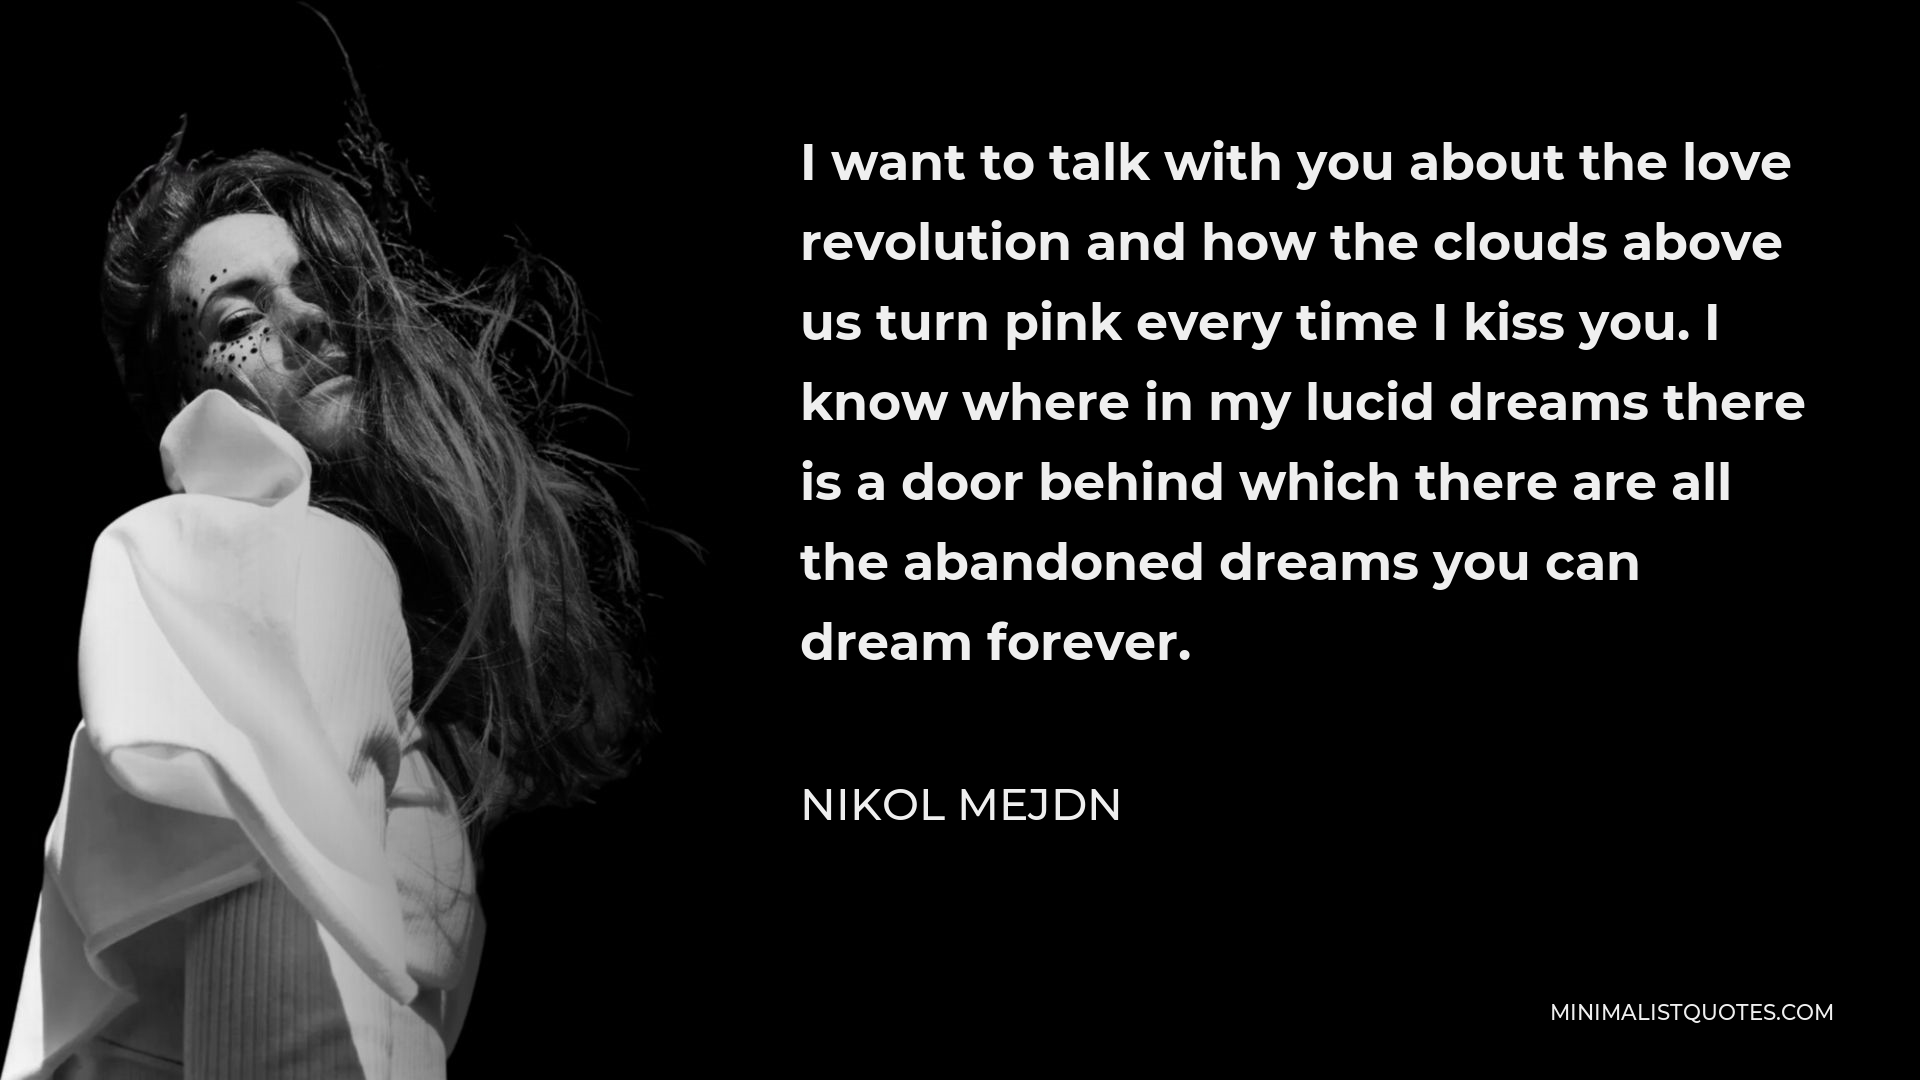 Nikol Mejdn Quote - I want to talk with you about the love revolution and how the clouds above us turn pink every time I kiss you. I know where in my lucid dreams there is a door behind which there are all the abandoned dreams you can dream forever.